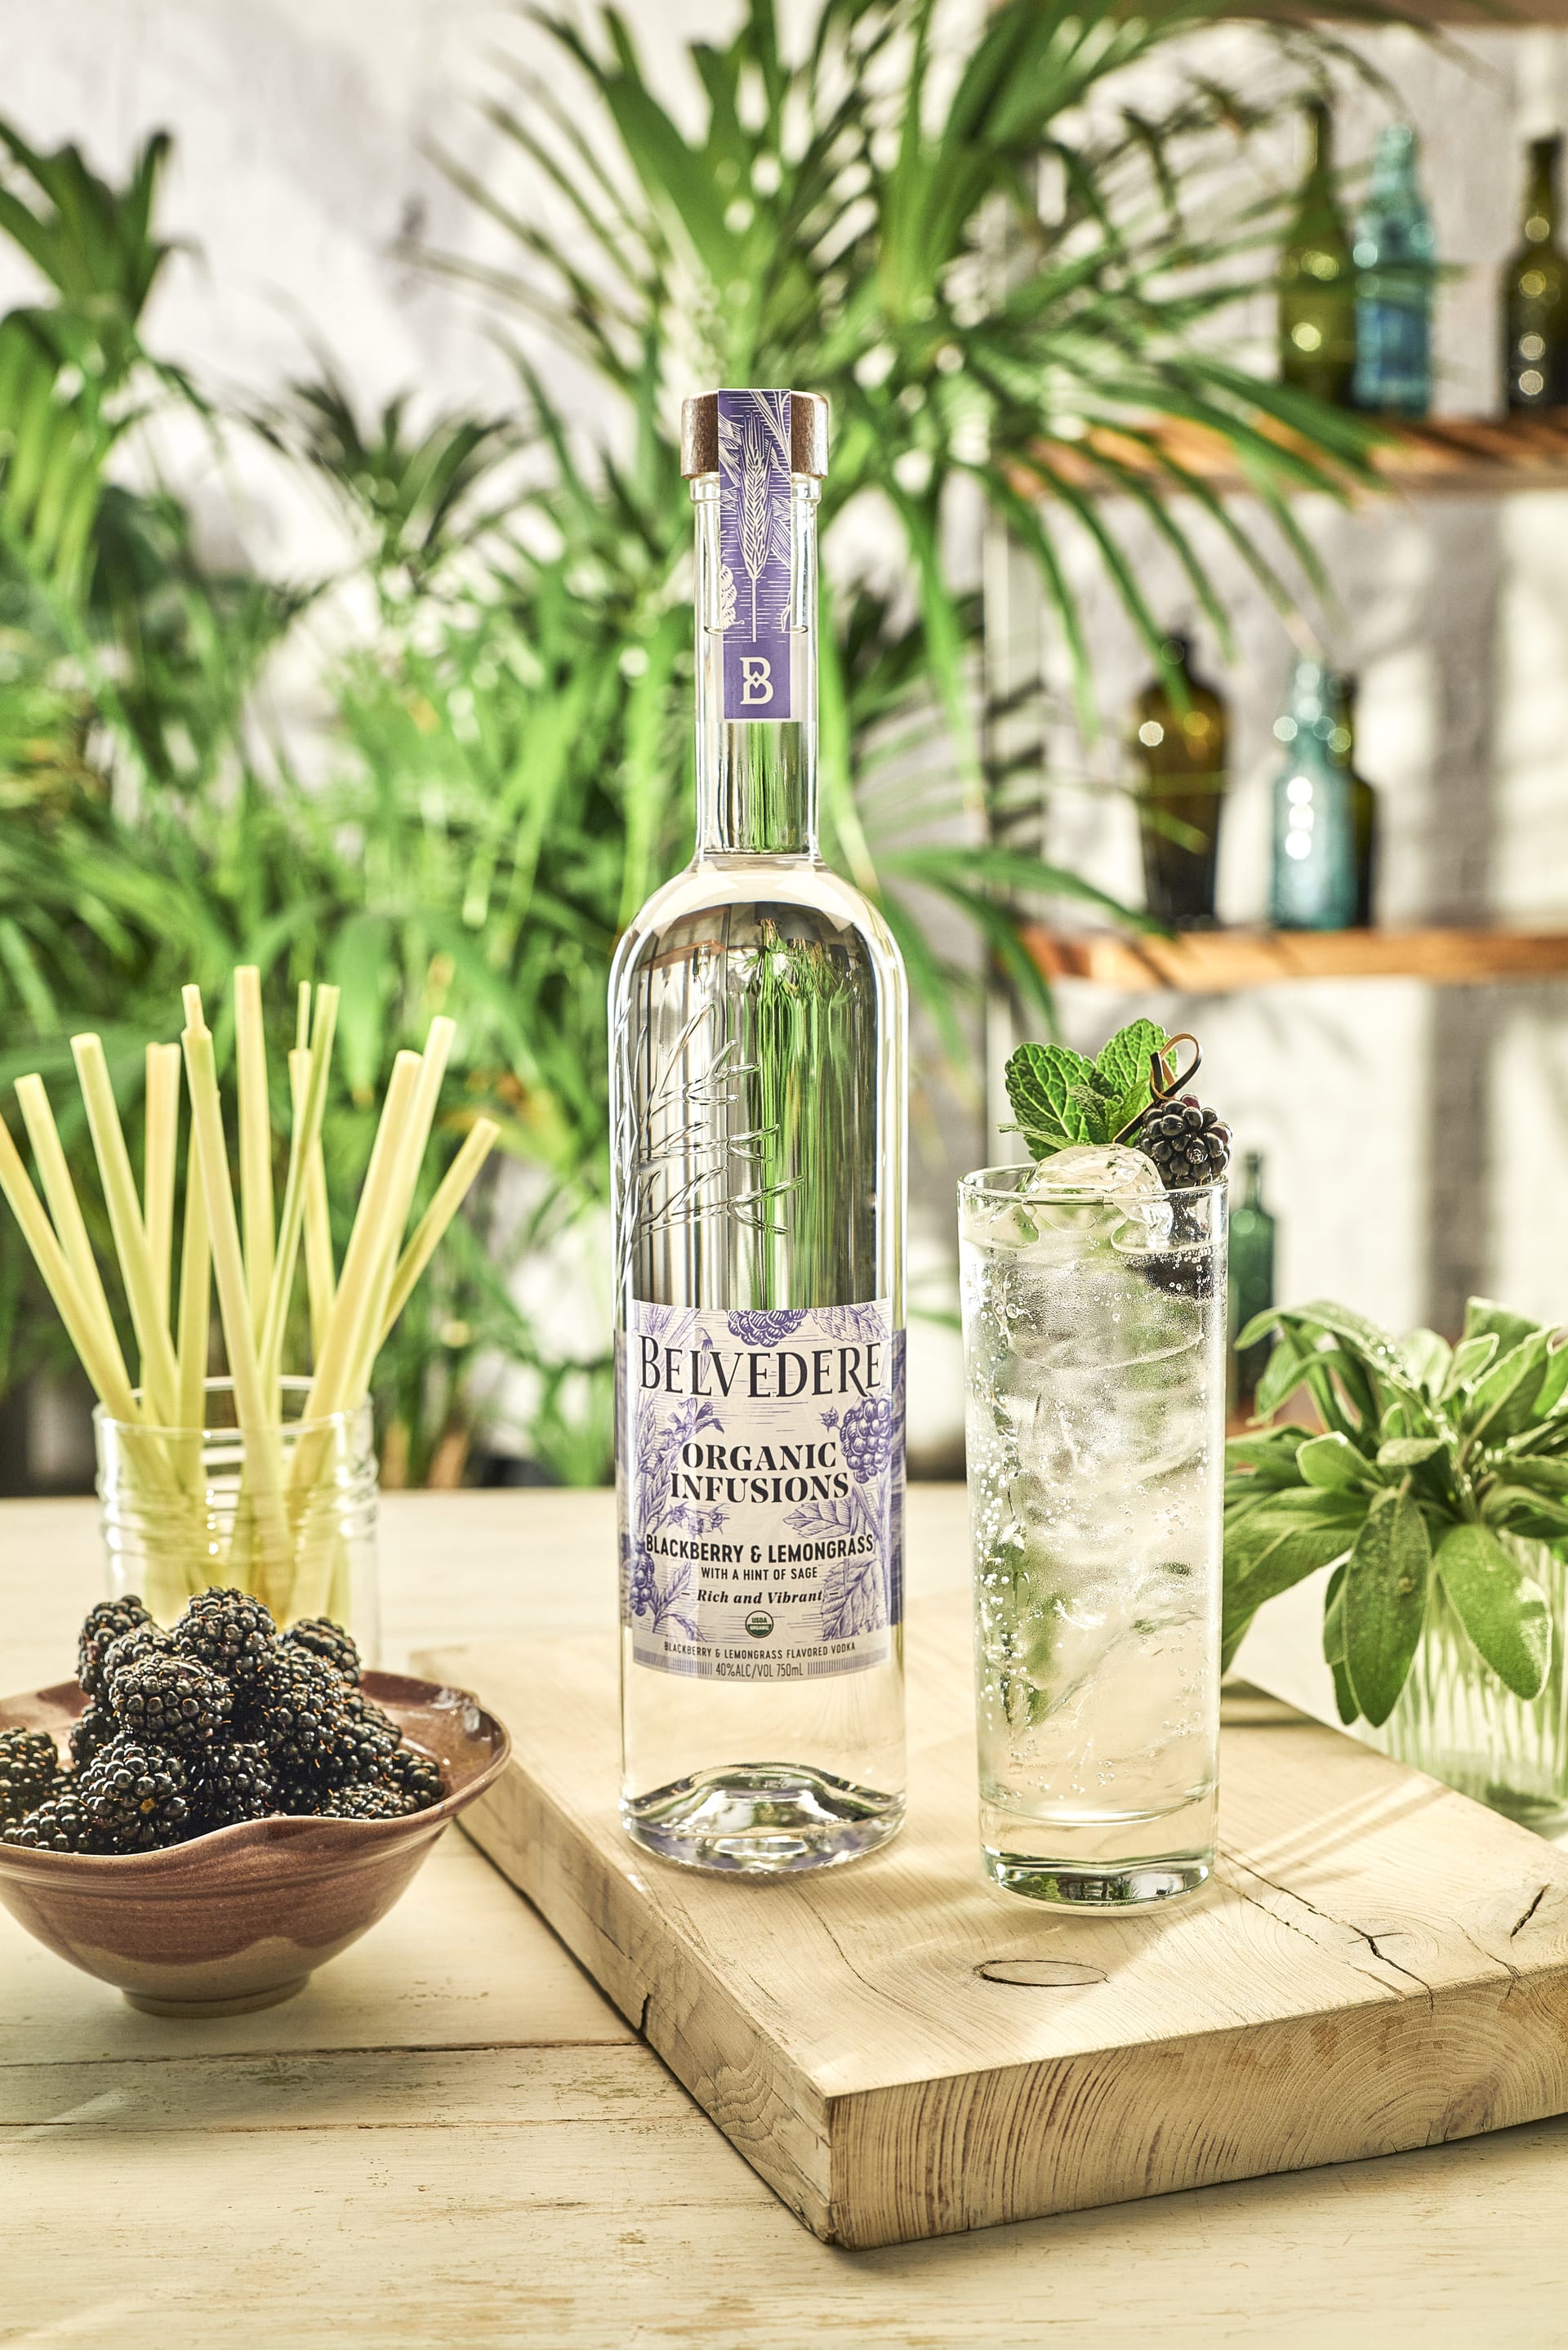 Belvedere Vodka's Product Launch Centers Sustainability